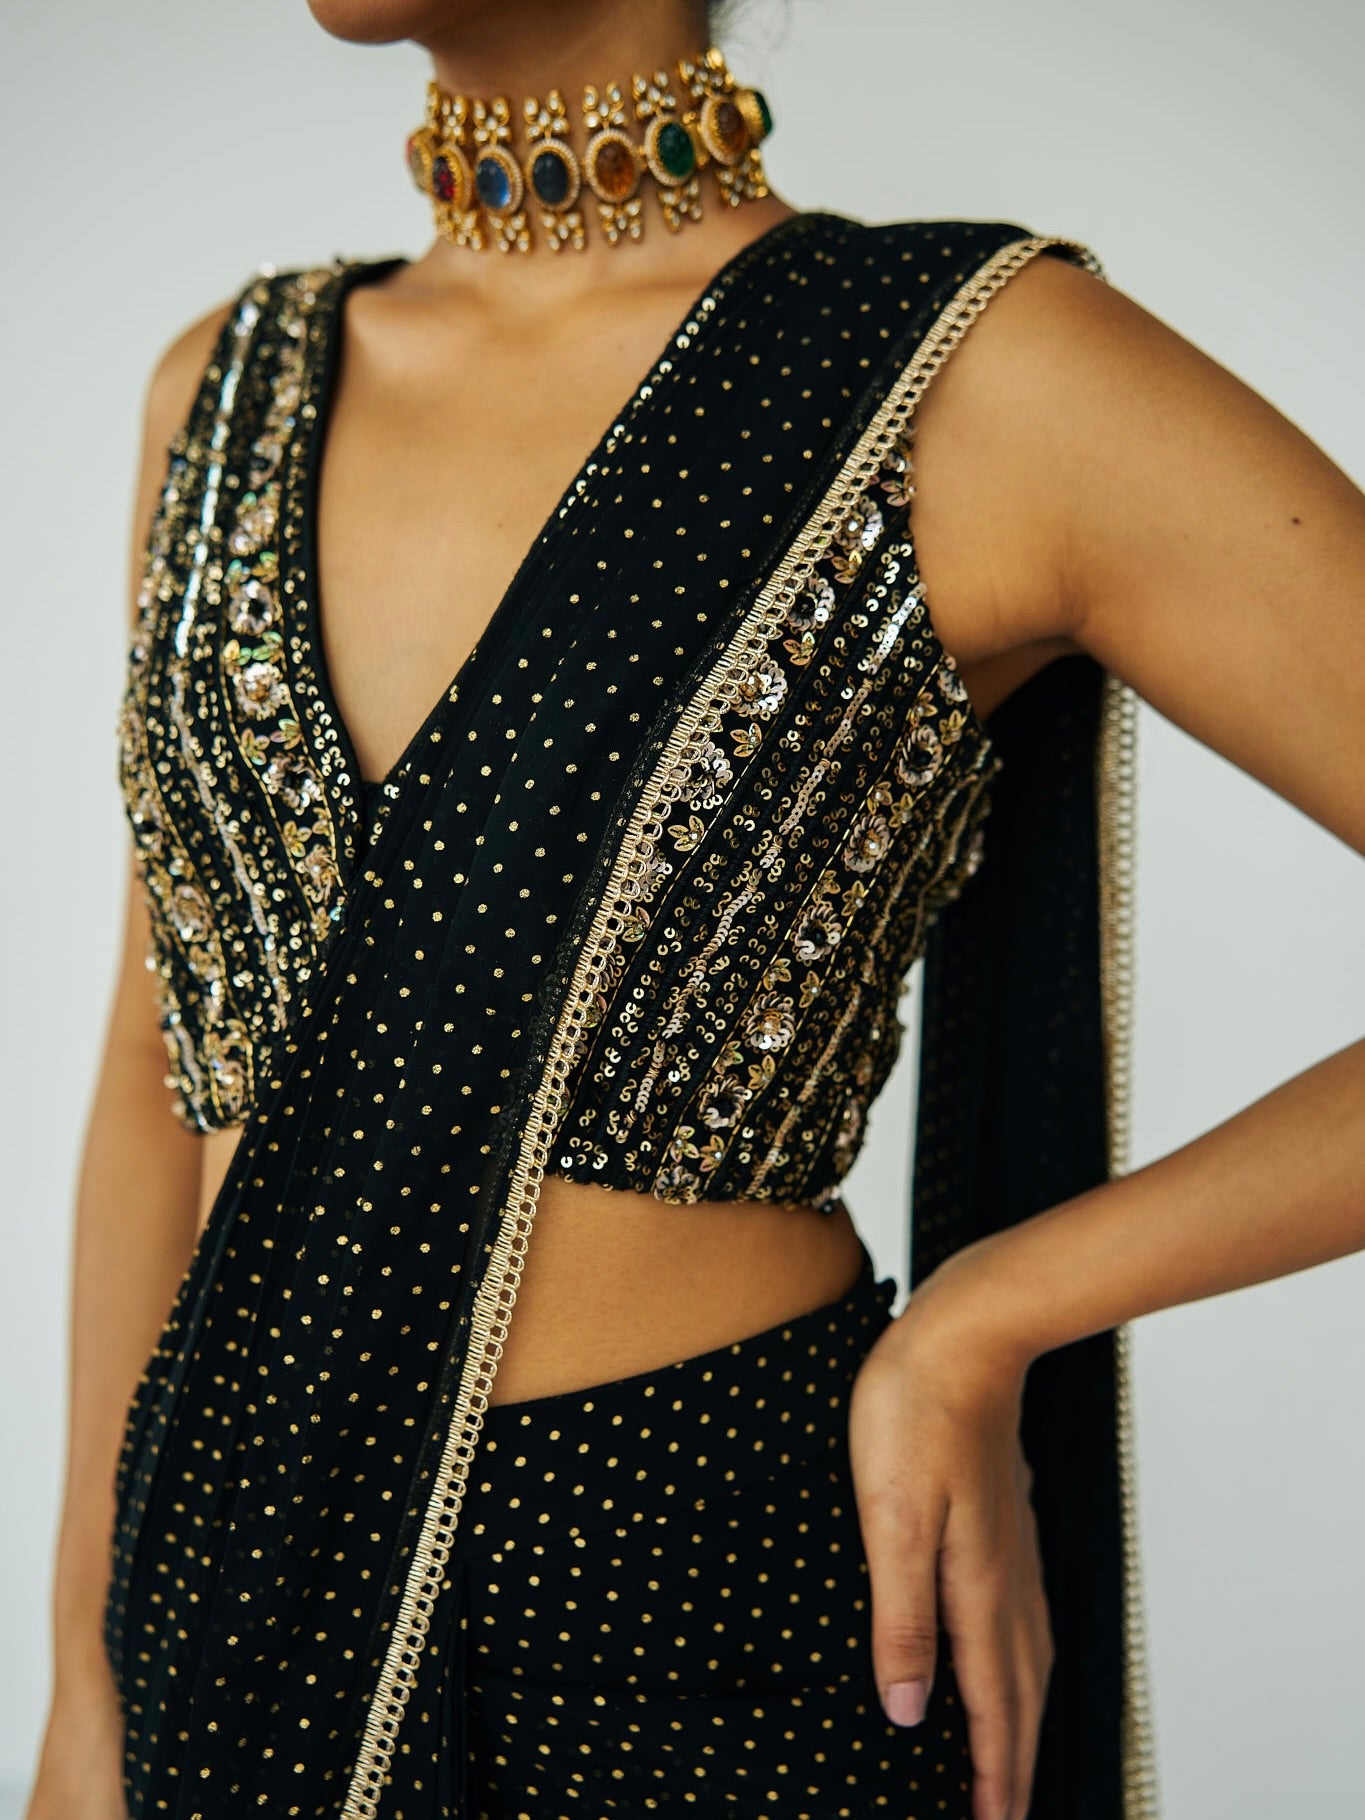 This outfit features a skirt with attached wrap-around draping - all pre-stitched so you can put the outfit together in 30 seconds or less. The drape has small gold embellishments throughout and the piece is paired with a gold hand-embroidered v-neck blouse. 